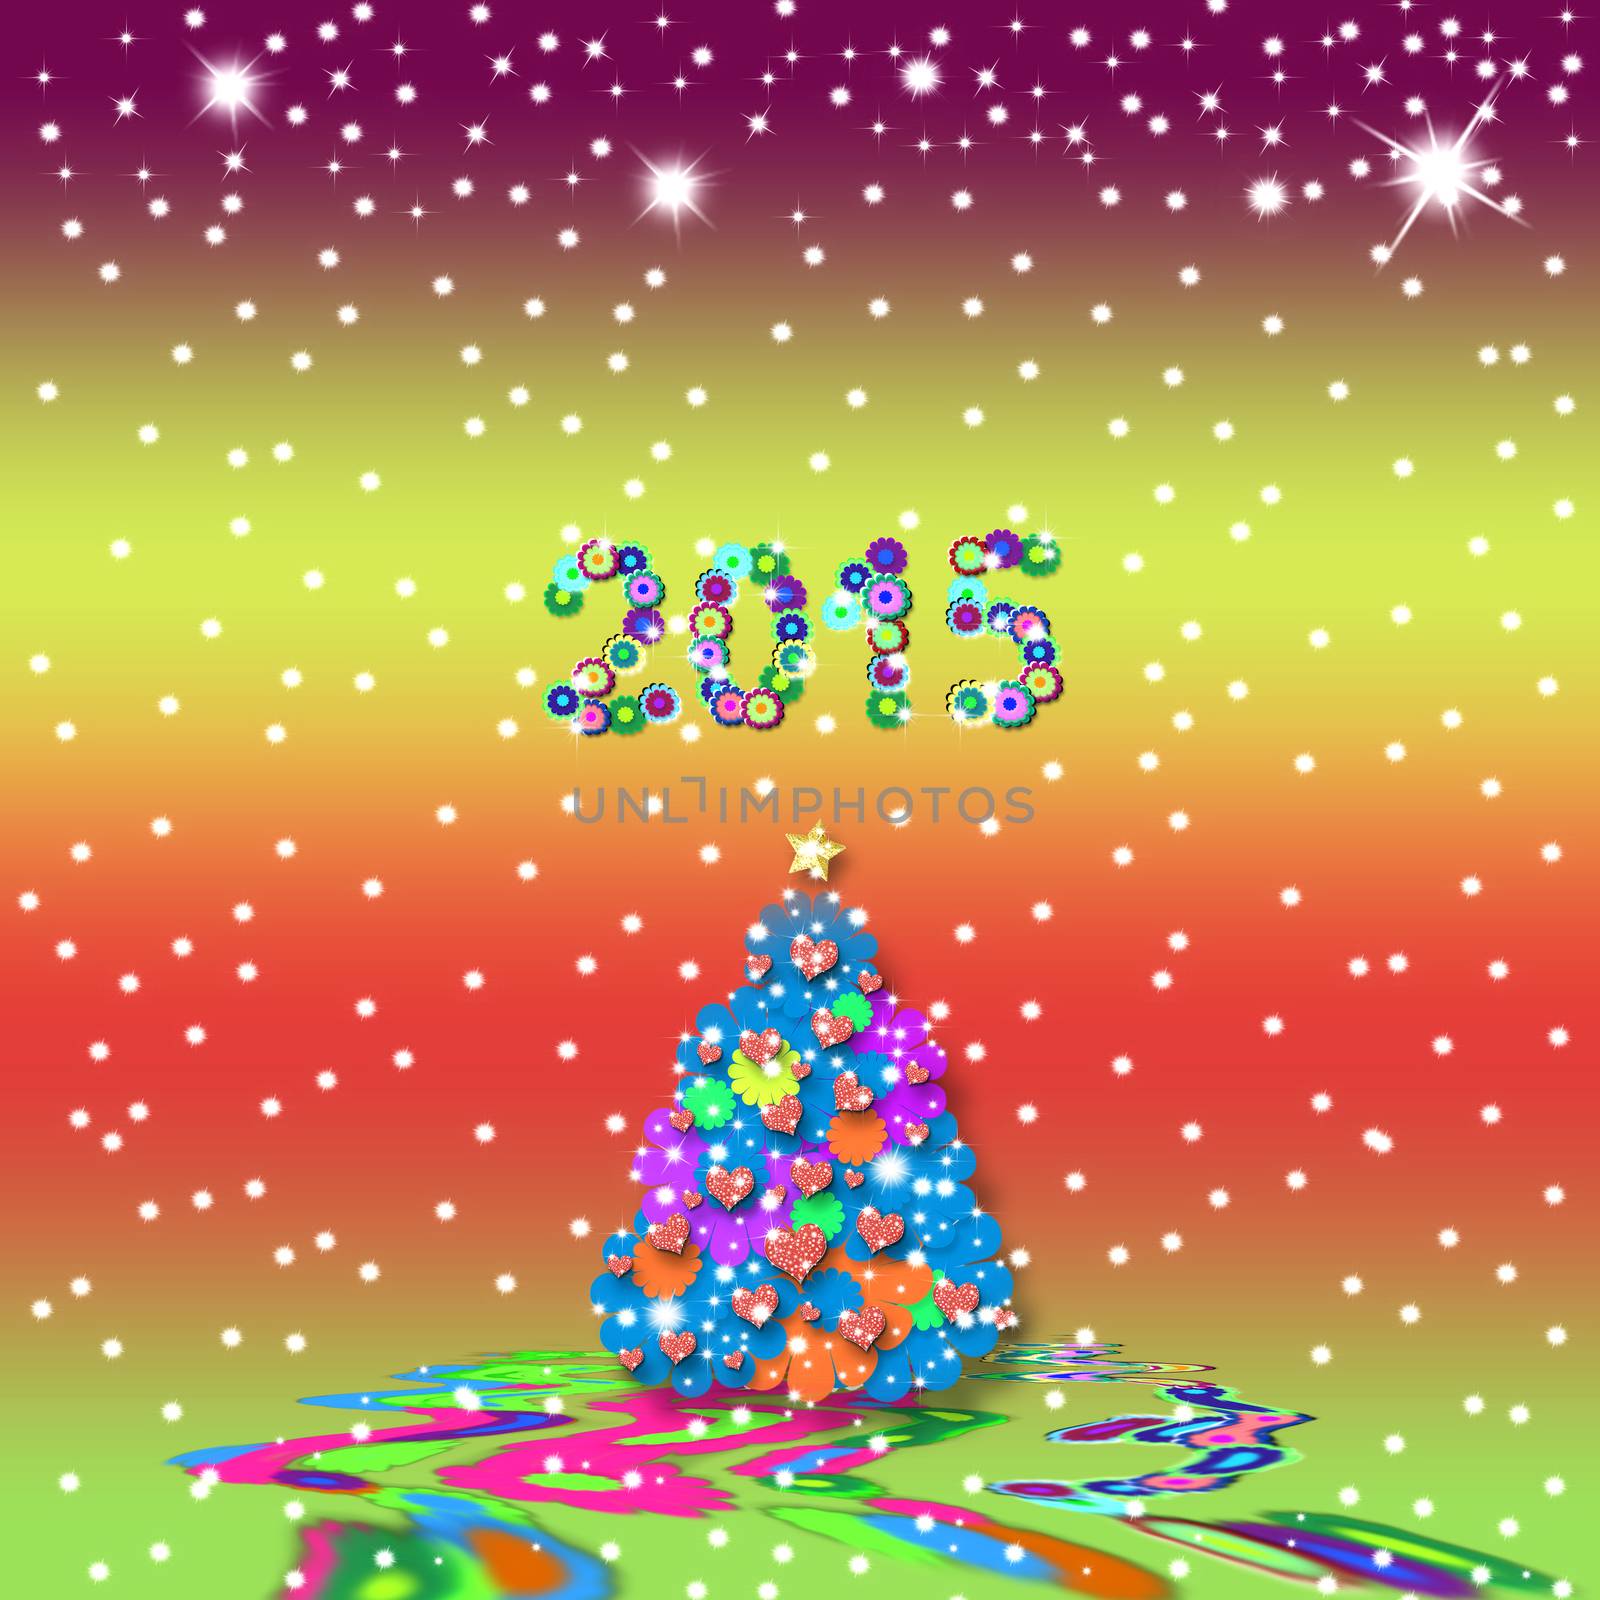 Christmas greeting card 2015 by Carche